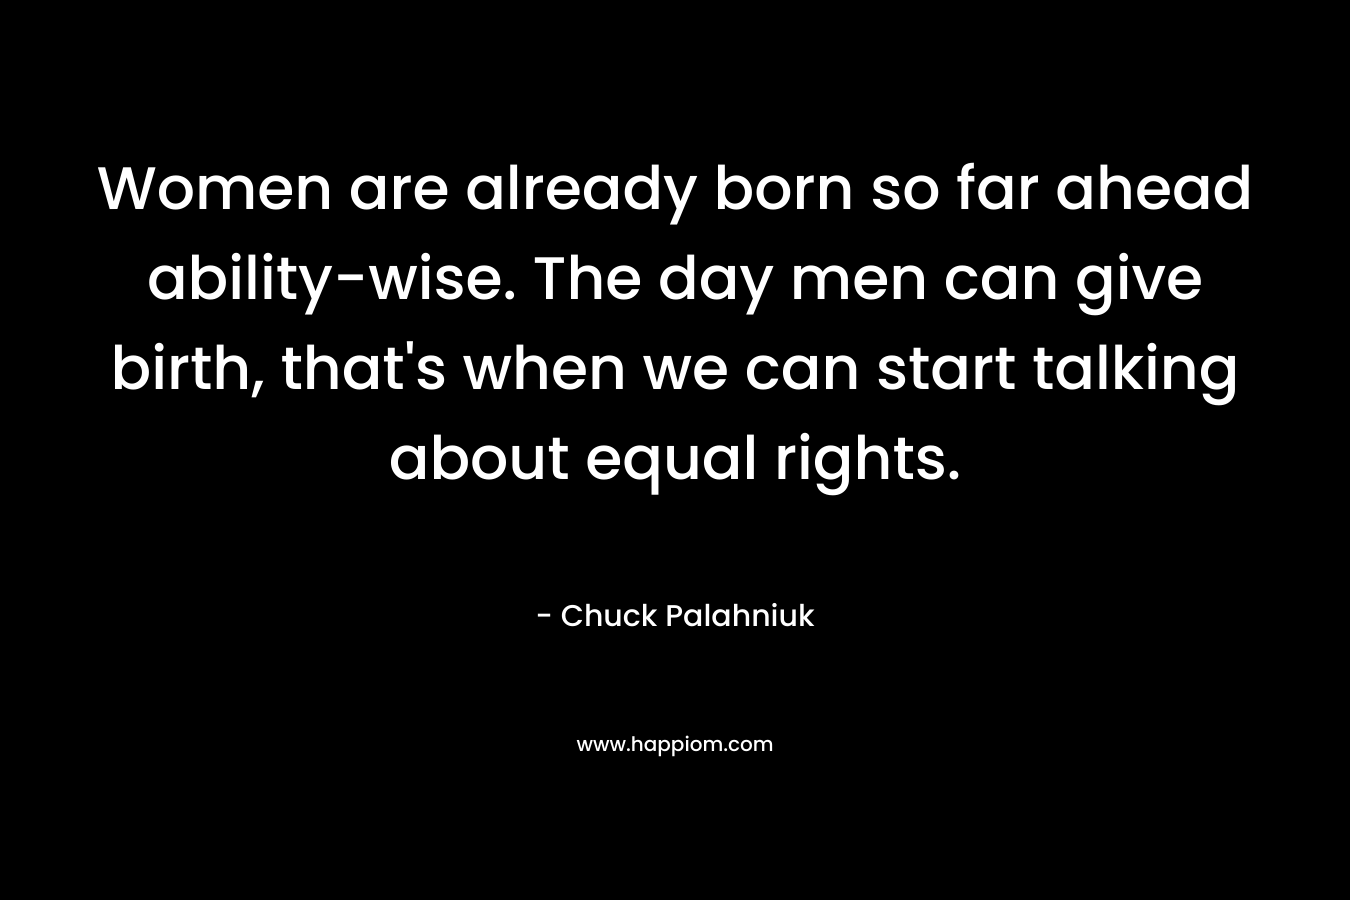 Women are already born so far ahead ability-wise. The day men can give birth, that's when we can start talking about equal rights.